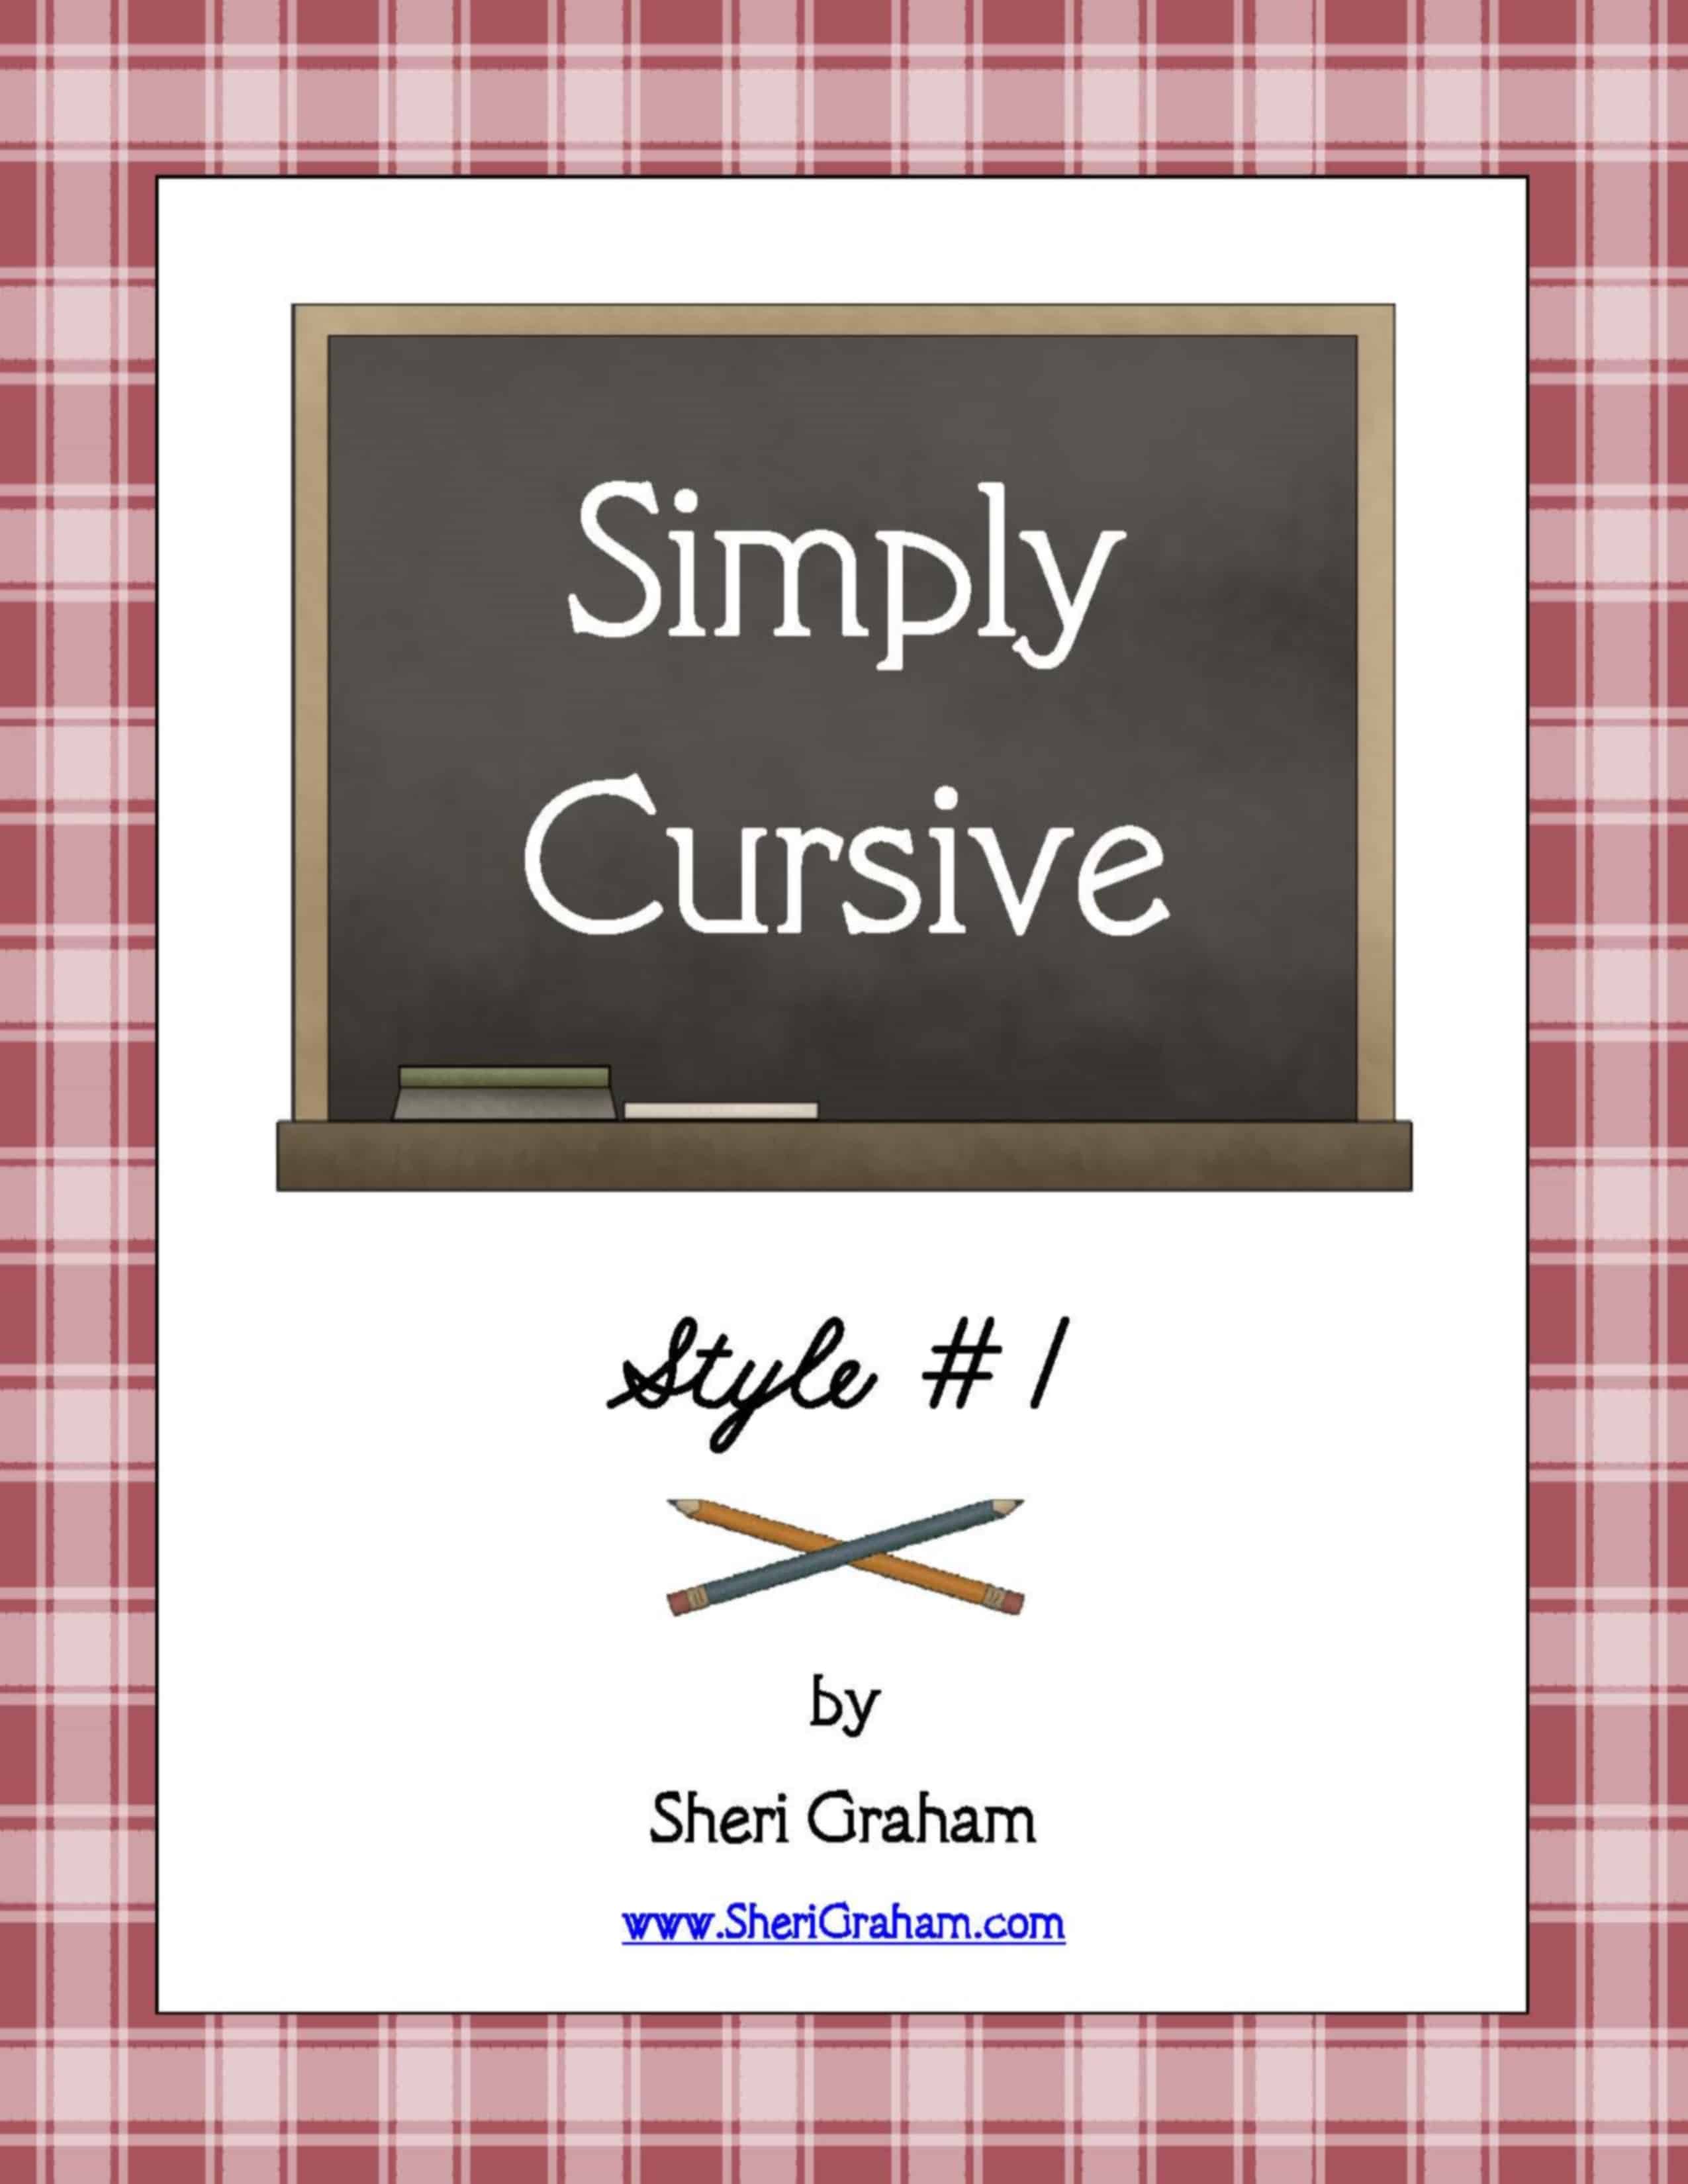 Simply Cursive Now Available in Softcover!